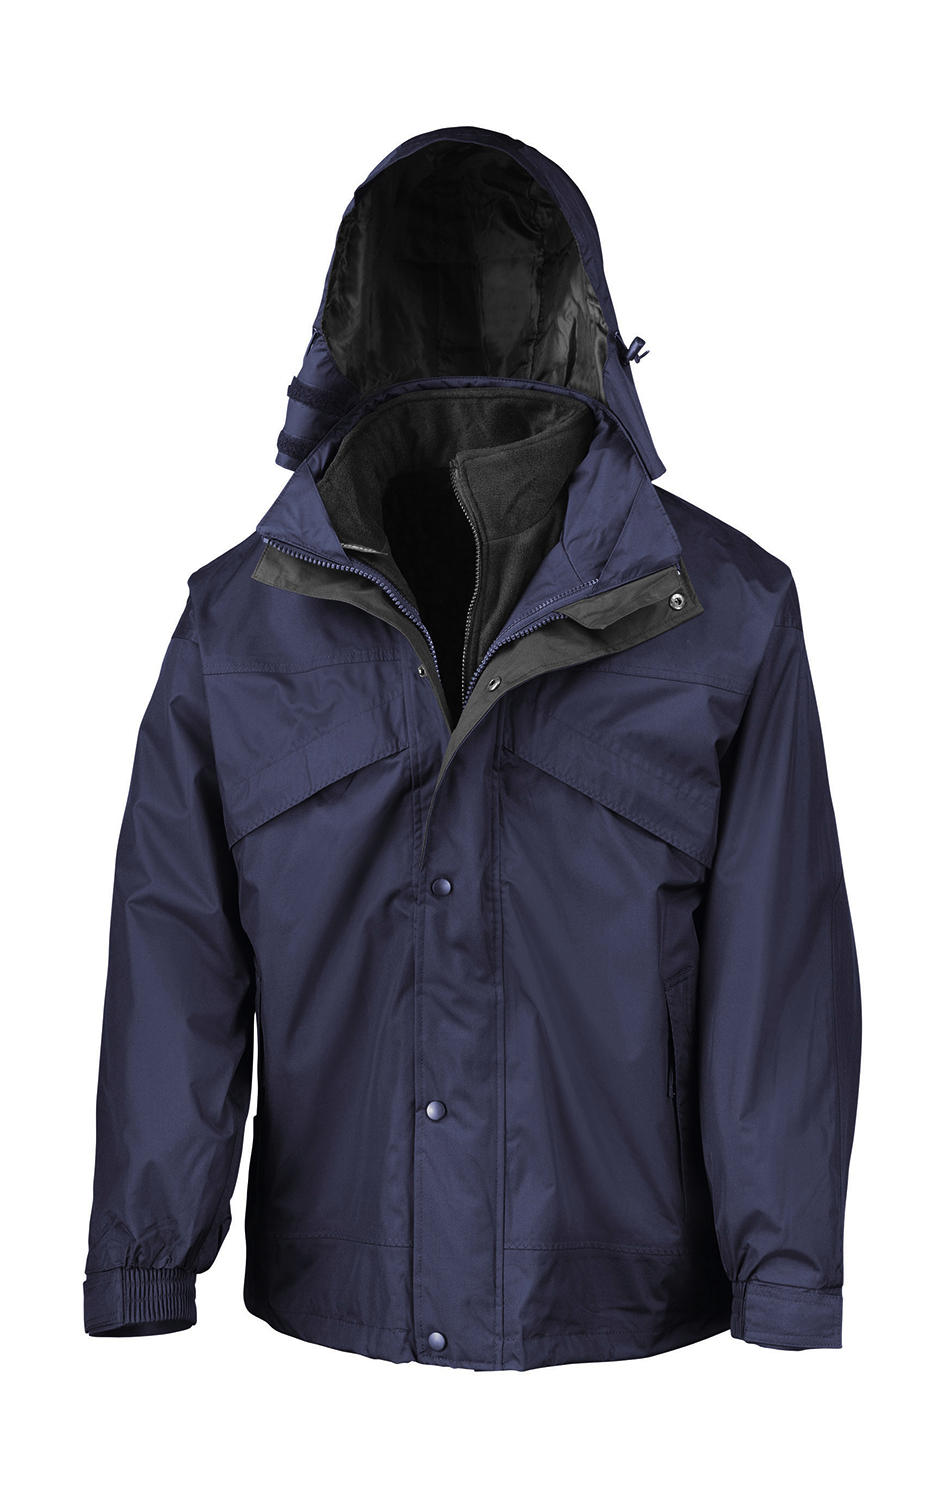  3-in-1 Jacket with Fleece in Farbe Navy